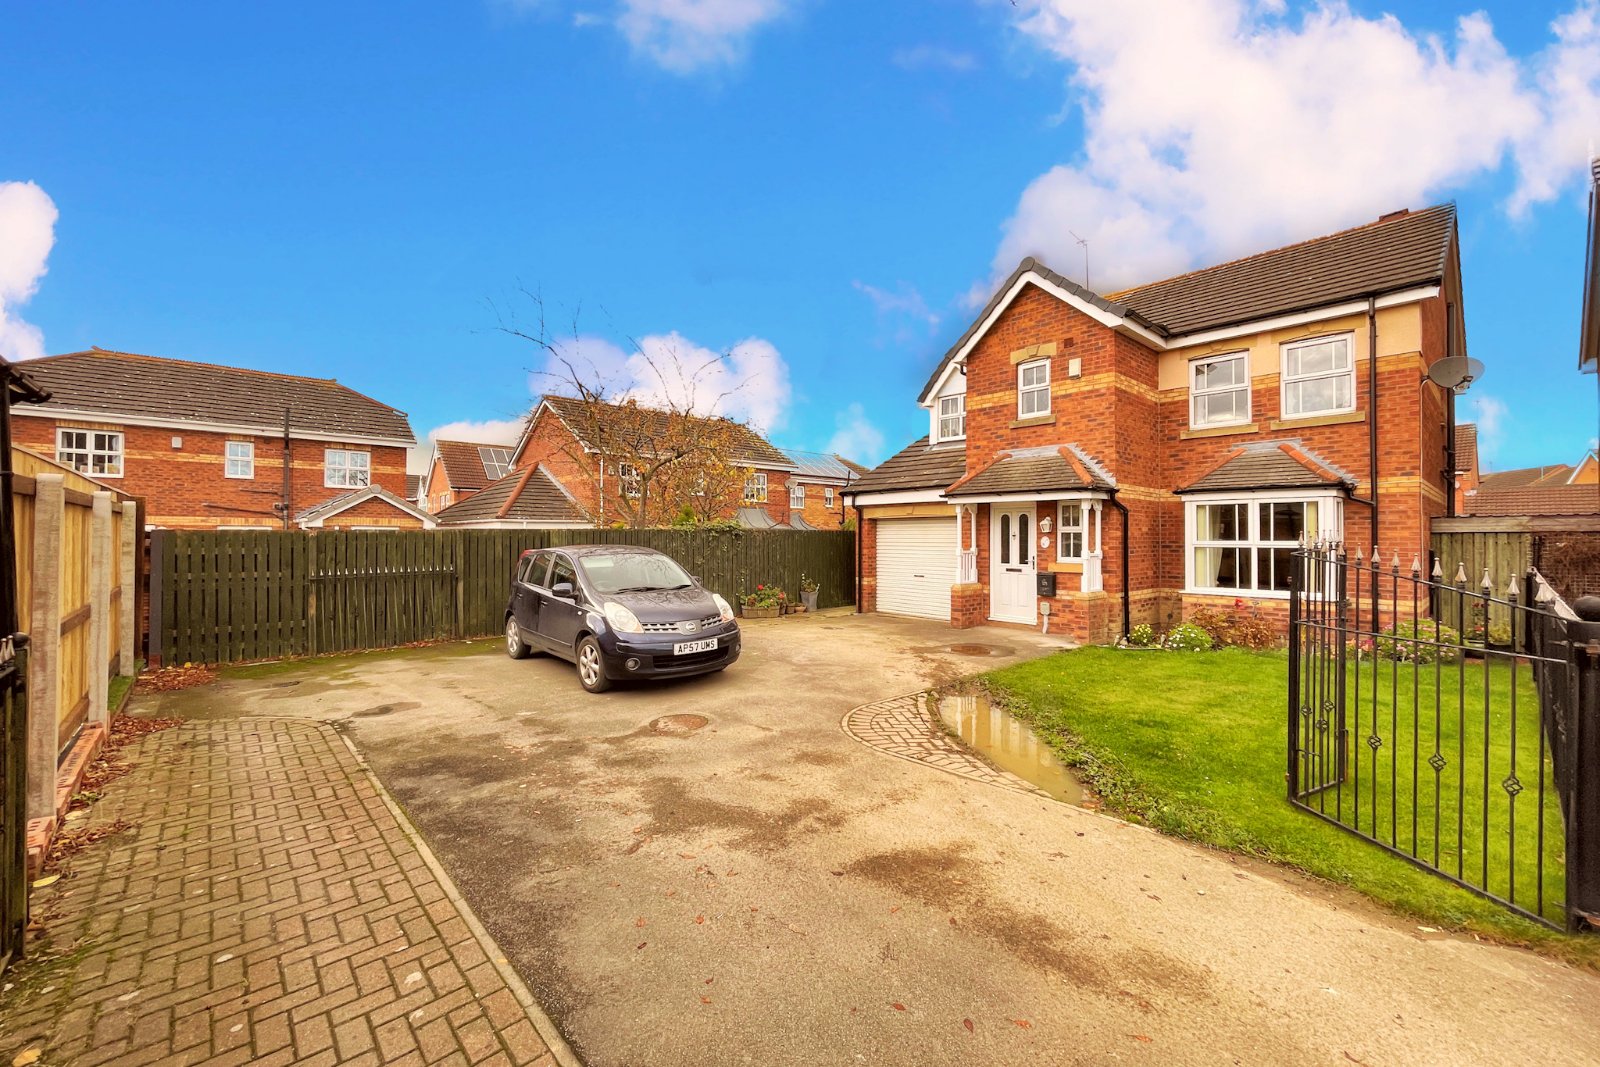 4 bed house for sale in Trent Park, Kingswood - Property Image 1